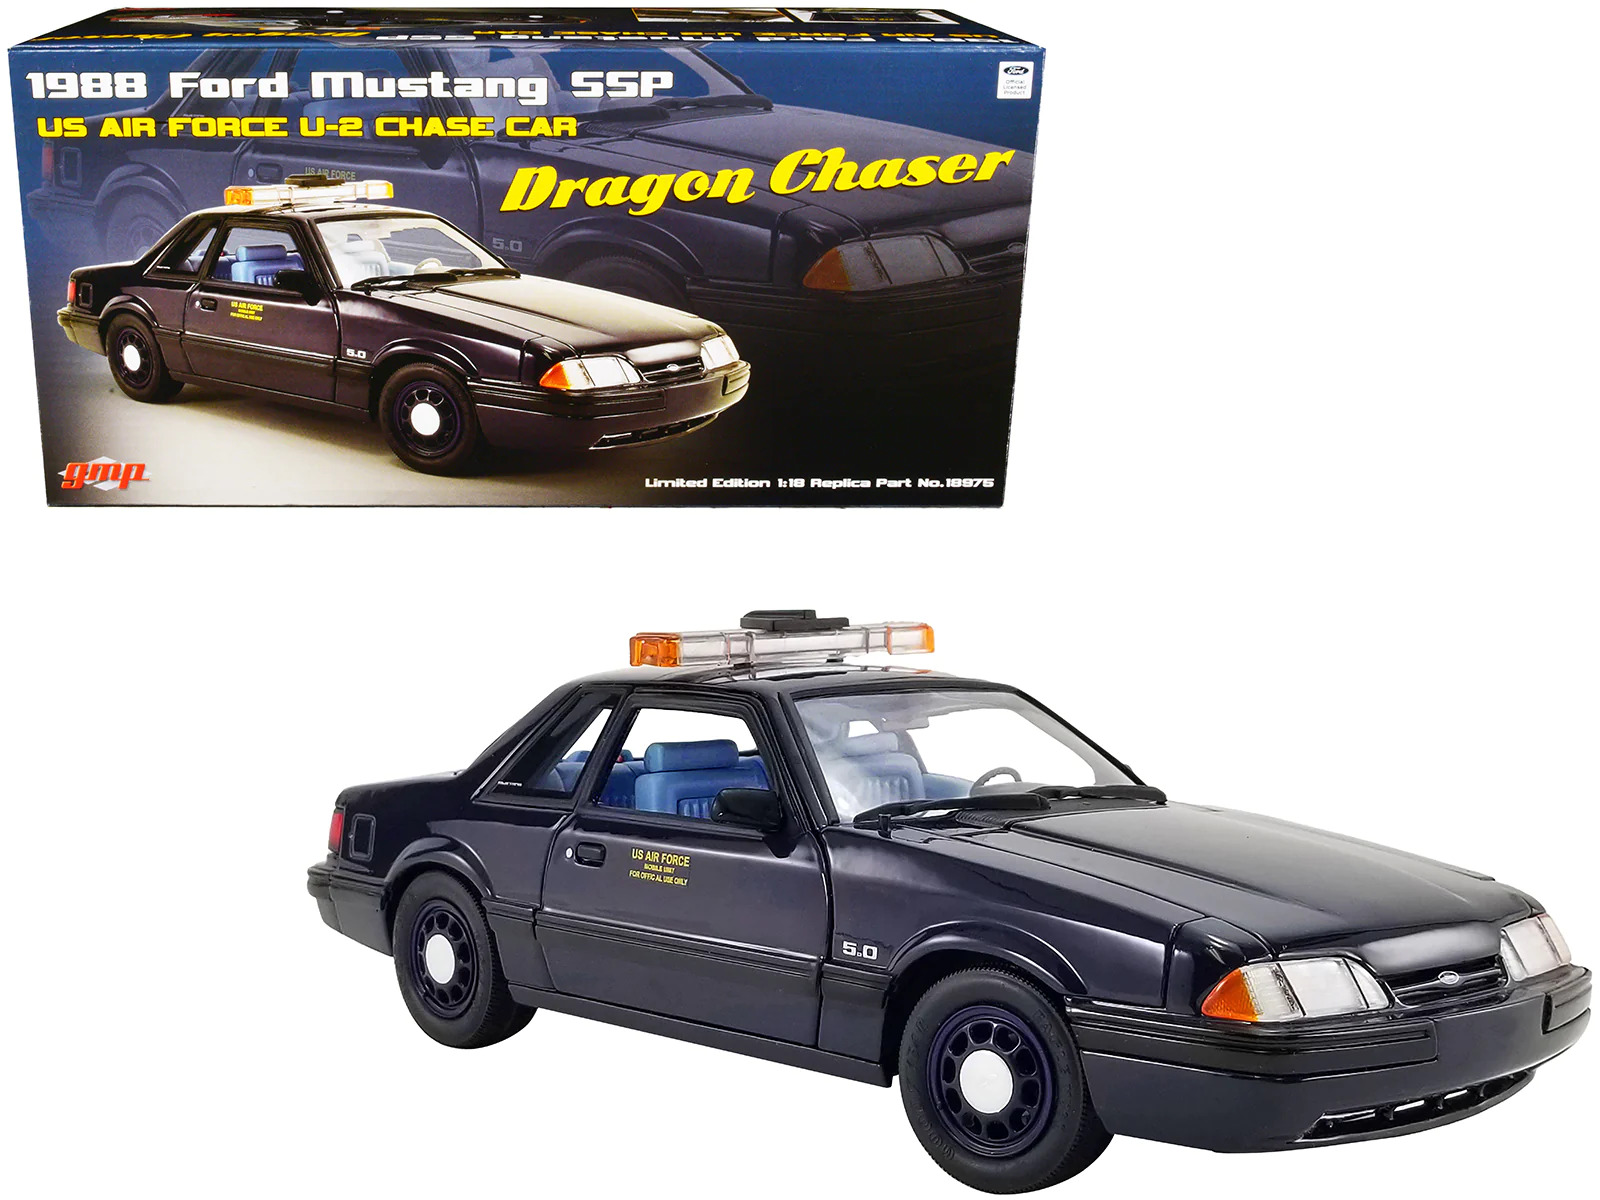 1988 Ford Mustang 50 SSP - Chase Car Dragon Chaser 852 1/18 Diecast Model